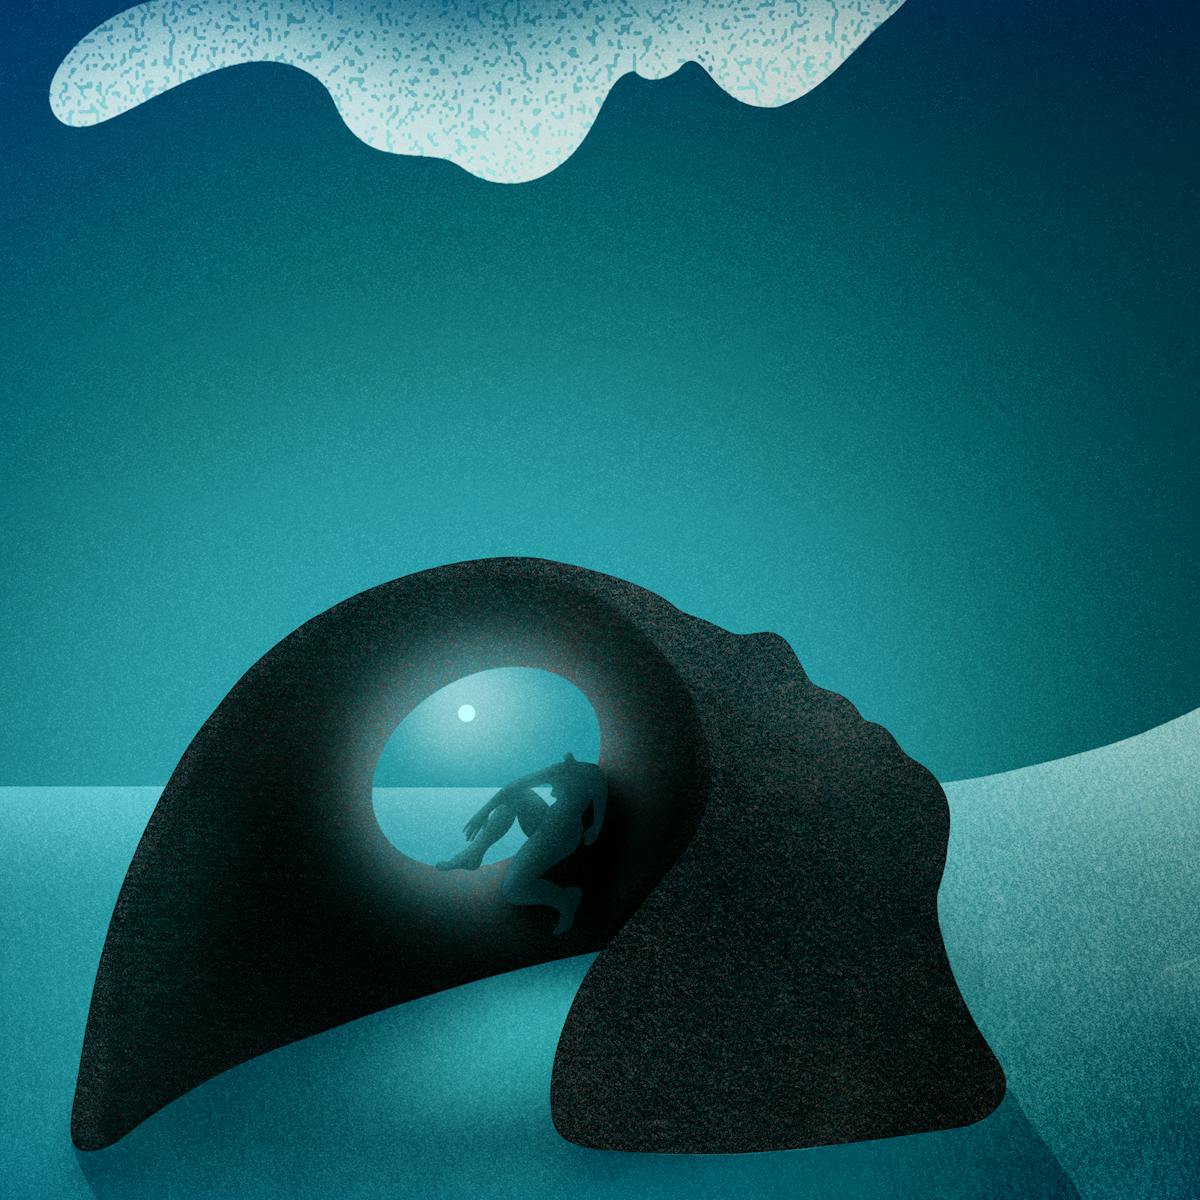 Digital abstract artwork showing a seascape with a small rock island in the foreground whose shape resembles the profile of a human head. The eye socket translates as a hole through which the horizon and the moon can be seen. Sat in the eye socket is a small human figure, hunched over, head bowed. To the right of the island two large wave are surging though the sky, about to crash down on the figure. The overall hues are blues and blacks.